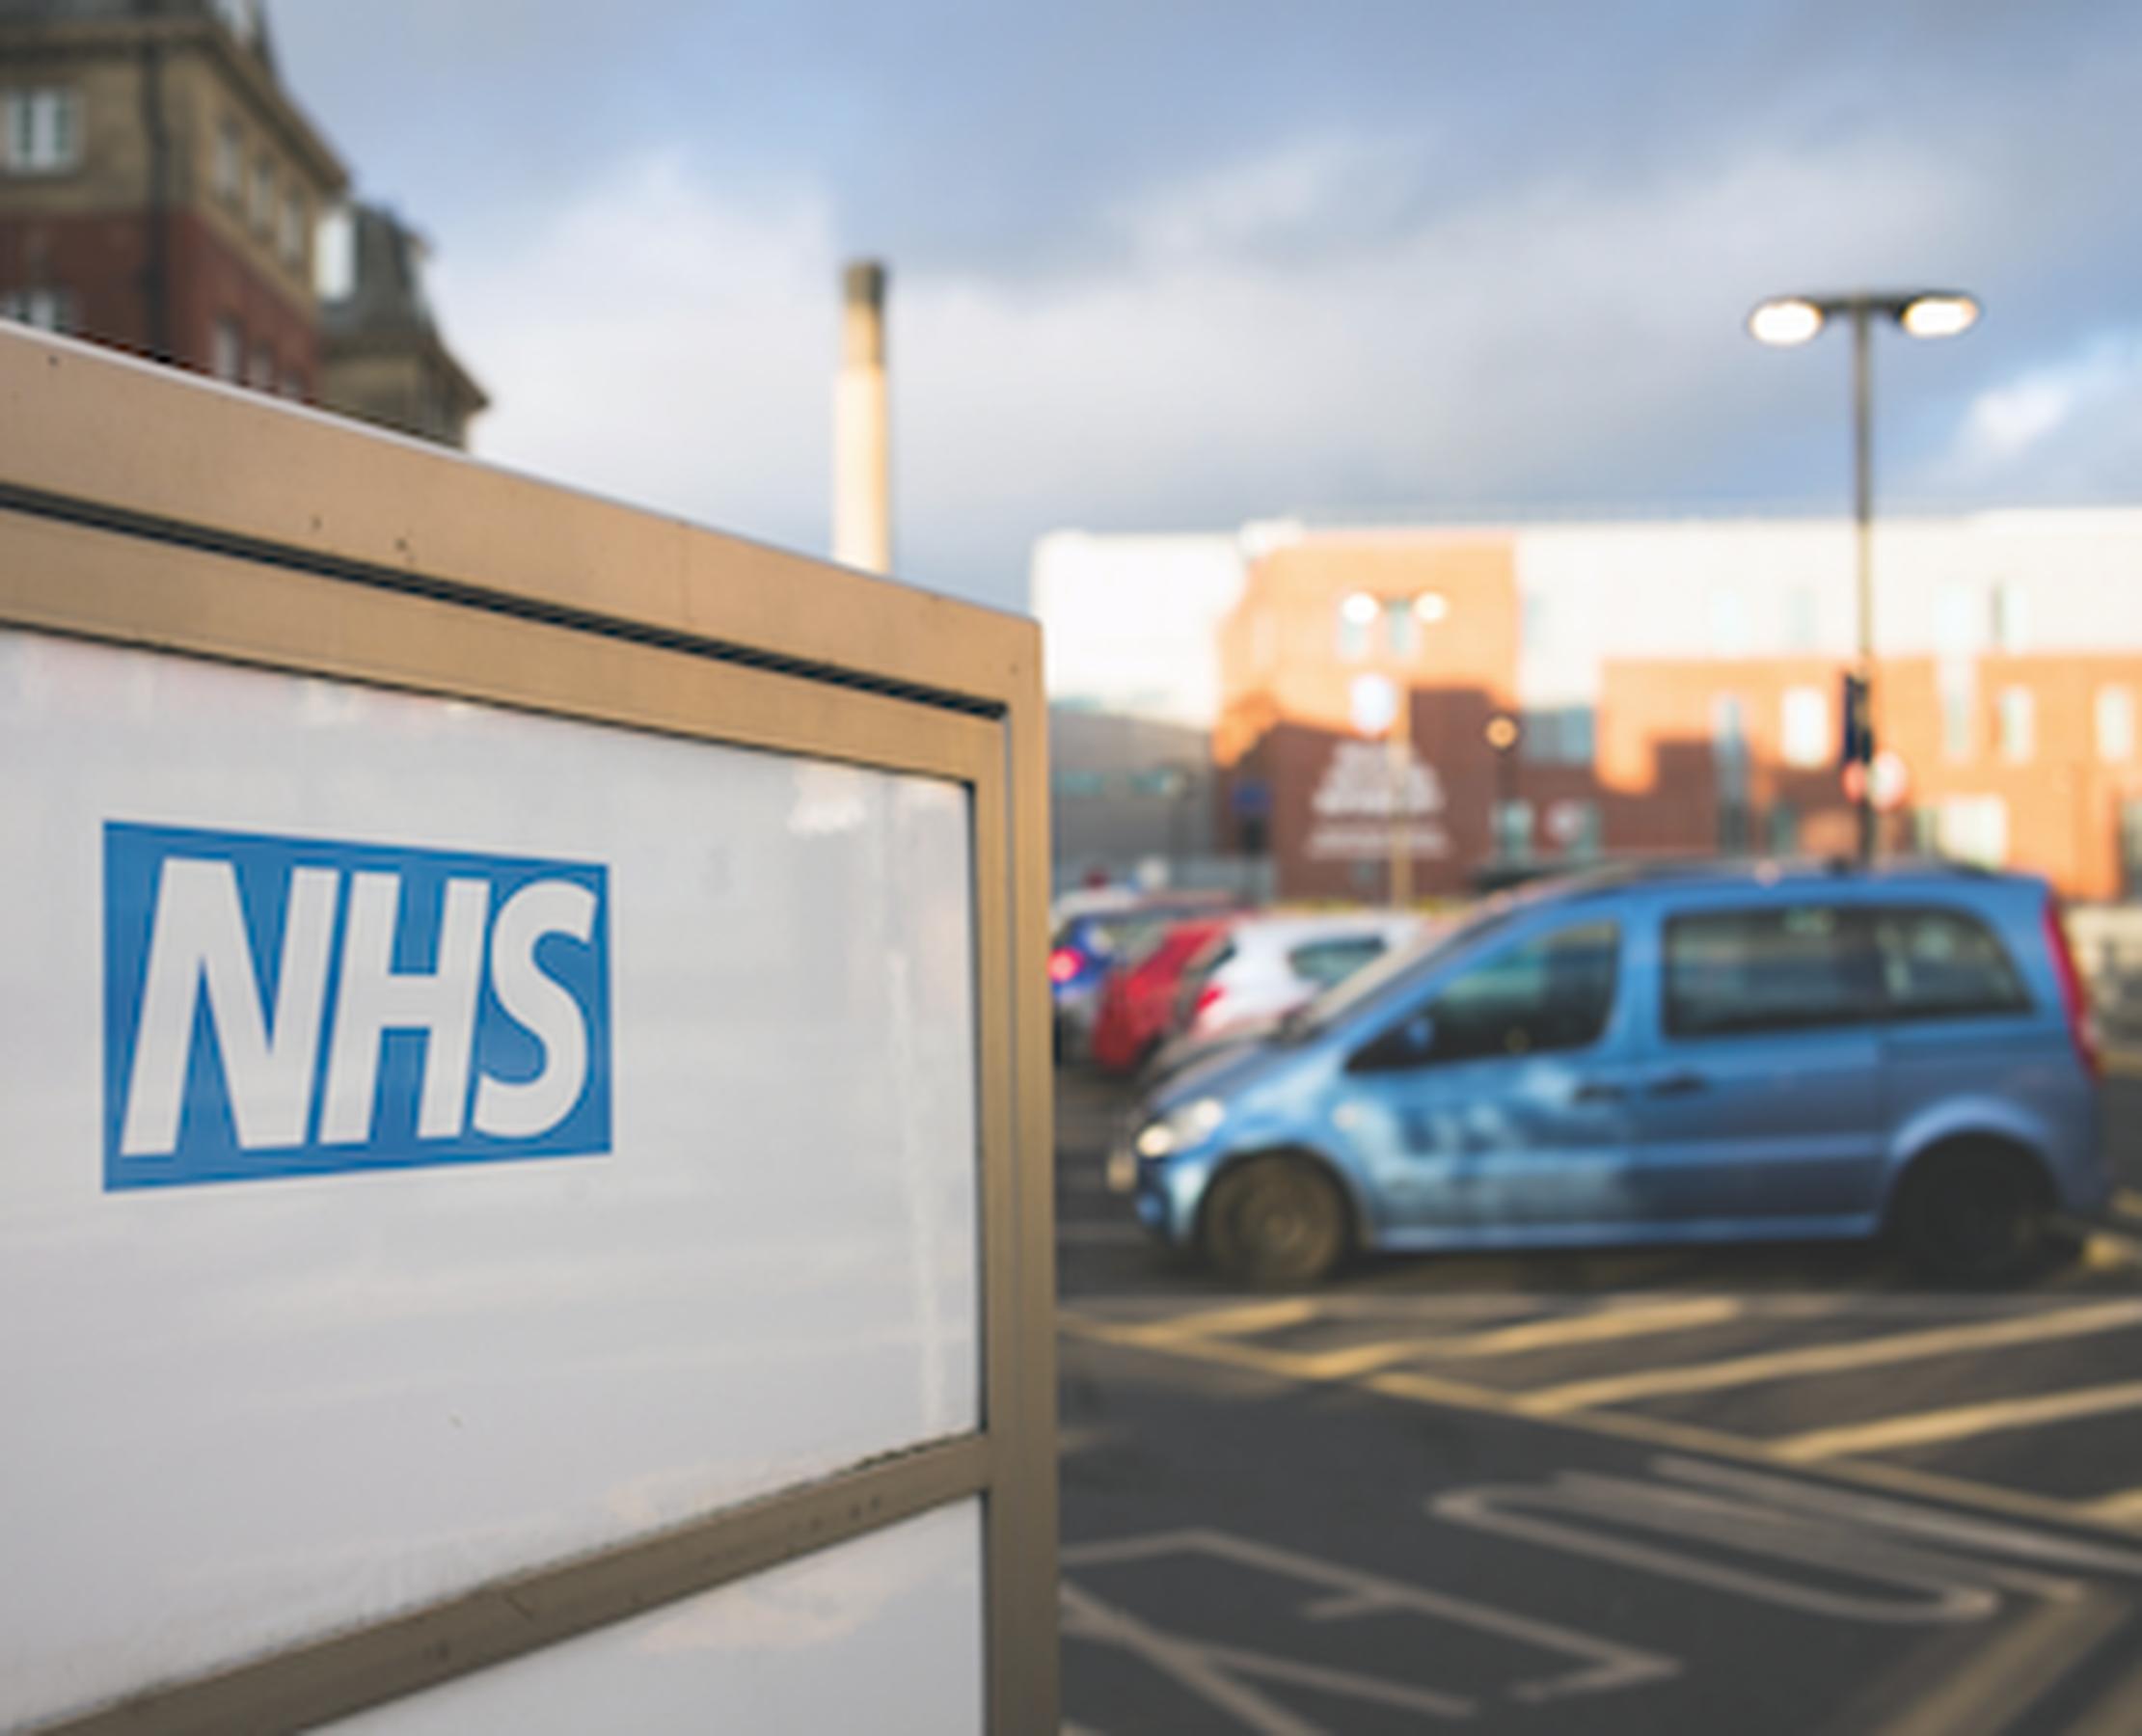 NHS staff will get free parking at hospitals